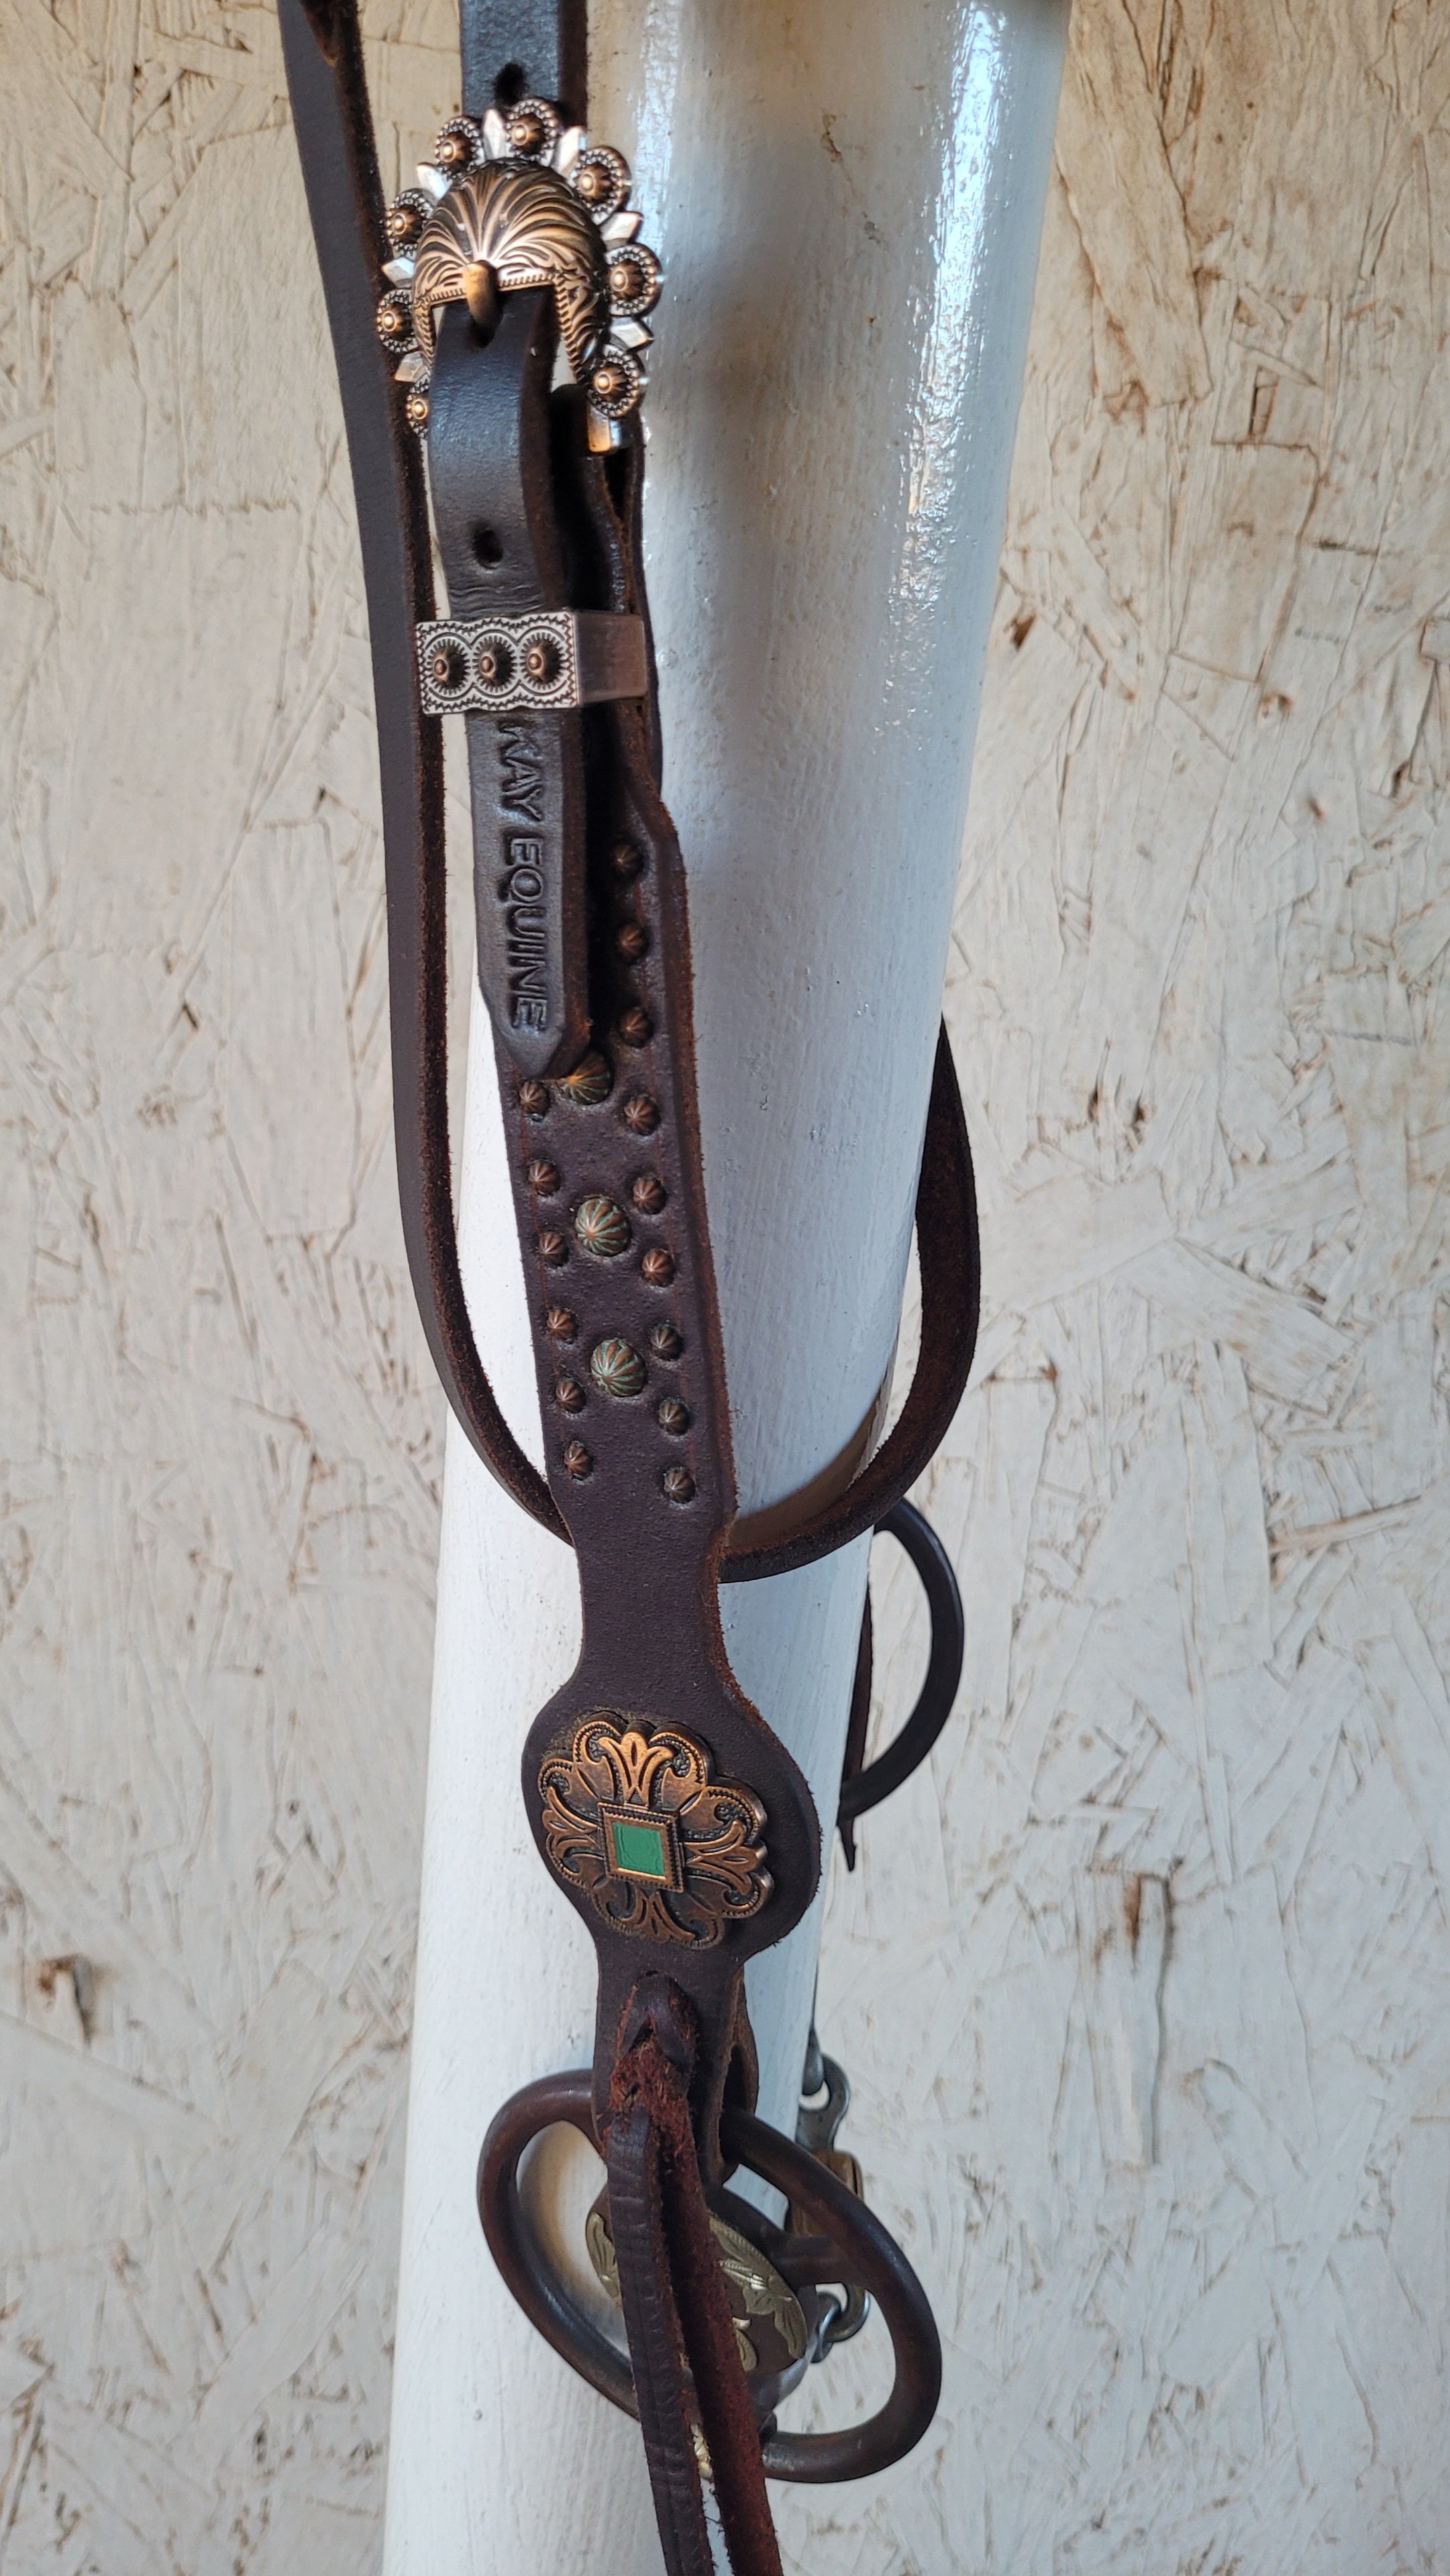 Fancy Kay Equine Browband Headstall with Mikmar Loose Ring Snaffle Bit